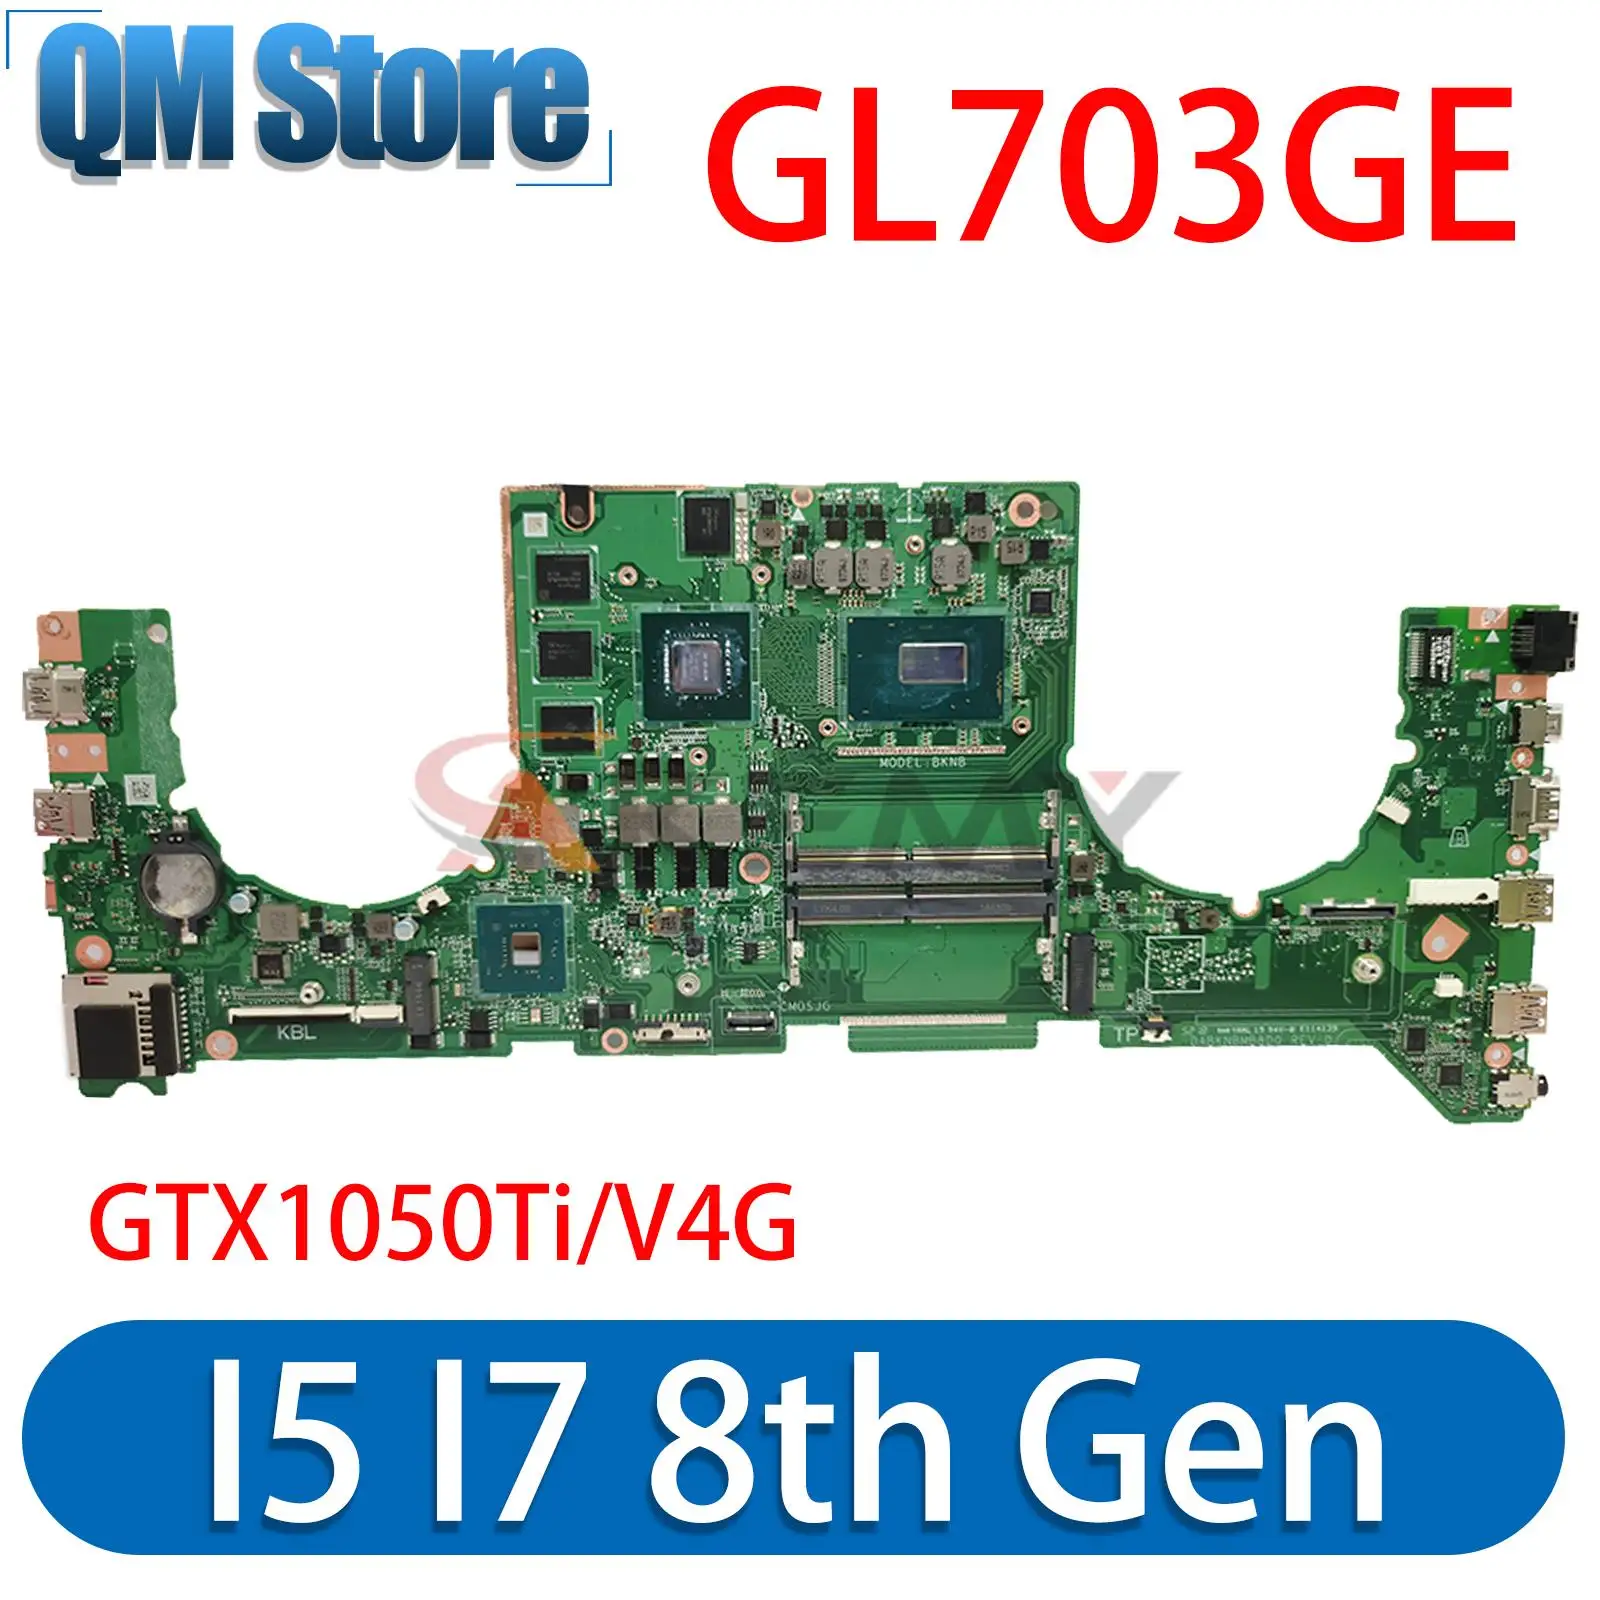 

DABKNBMB8D0 Mainboard GL703GE S7BE Laptop Motherboard W/I5-8300H I7-8750H GTX1050Ti/V4G DDR4 Notebook Maintherboard